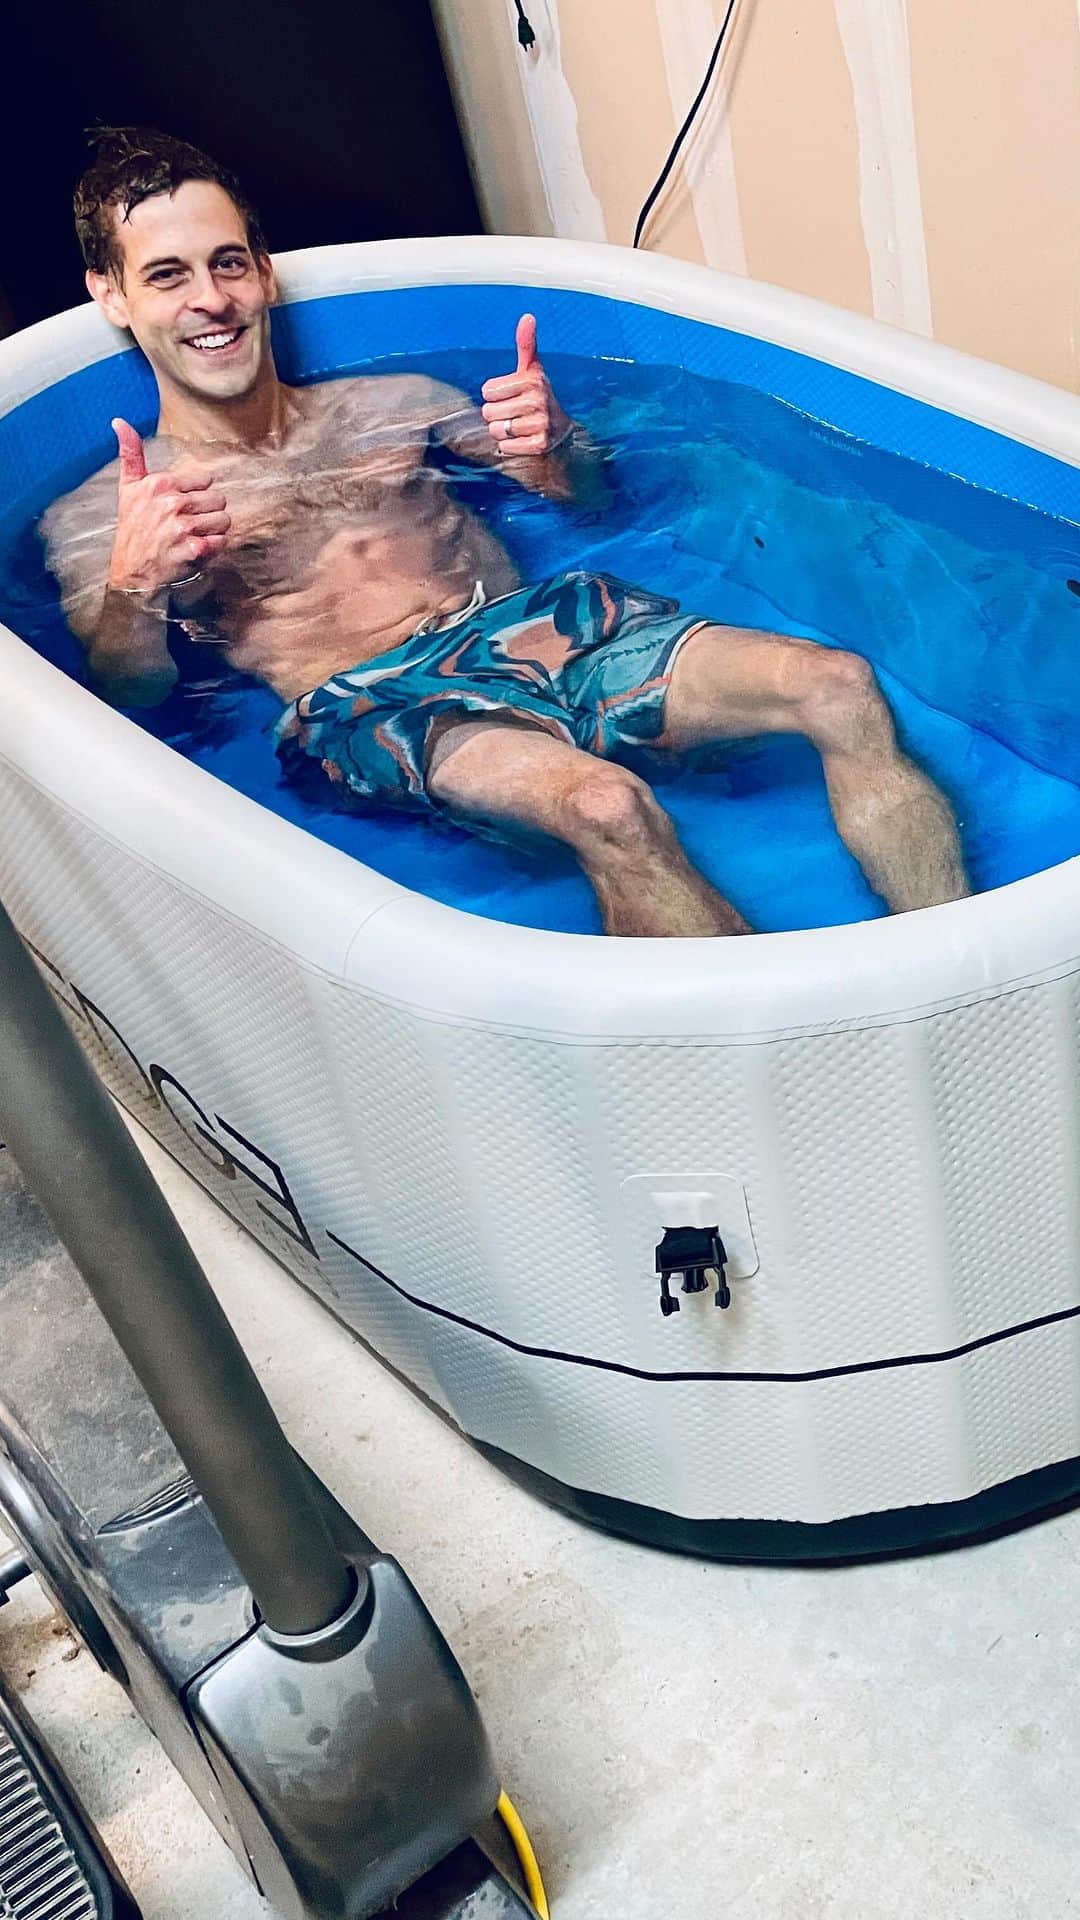 デリック・ディラードのインスタグラム：「🧊❓Have you ever tried cold water therapy? 🧘🏻‍♂️I’ve known of the benefits of cold water for athletic recovery for years (lots of experience with my legs in buckets of ice water after a high school cross country race or training), but it’s only been in the last few years that I’ve actually considered the other additional benefits to cold water therapy.   🧊Over the last few years, I have started practicing cold water therapy methods for more than just athletic recovery. I have found the techniques to be very helpful in relieving stress, increasing focus and boosting the immune system among other things. ✅  🧊When I first started, I just used the cold shower, and then I’d sometimes immerse in outdoor cold bodies of water when possible, and then eventually I would use tons of bags of ice in an ice barrel to get the immersive cold water effect.   🧊No more bags of ice necessary or problems with inconsistent access to cold water! I am excited to #partner with @edgetheorylabs and use their cold tub now at home! (+ I have a discount code for y’all below!) Their tub continuously filters and regulates the water to as low as 37 degrees, though my wife @jillmdillard loves that it also doubles as a hot tub since it can quickly heat up to 105 degrees! It is portable and made with tough, military grade technology. ✅   🧊Check out the direct link in my stories ⬆️ or go here to get all the details:➡️ https://www.edgetheorylabs.com/?ref=Z5CA6lXa0Mmxhh   ❗️🧊Don’t forget to claim your ⭐️$150 OFF⭐️with my code: DILLARD  #coldwatertherapy #edgetheorylabs #coldwaterimmersion #wimhof #mentalhealthmatters #athleticrecovery #runlife #coldtub @edgetheorylabs」